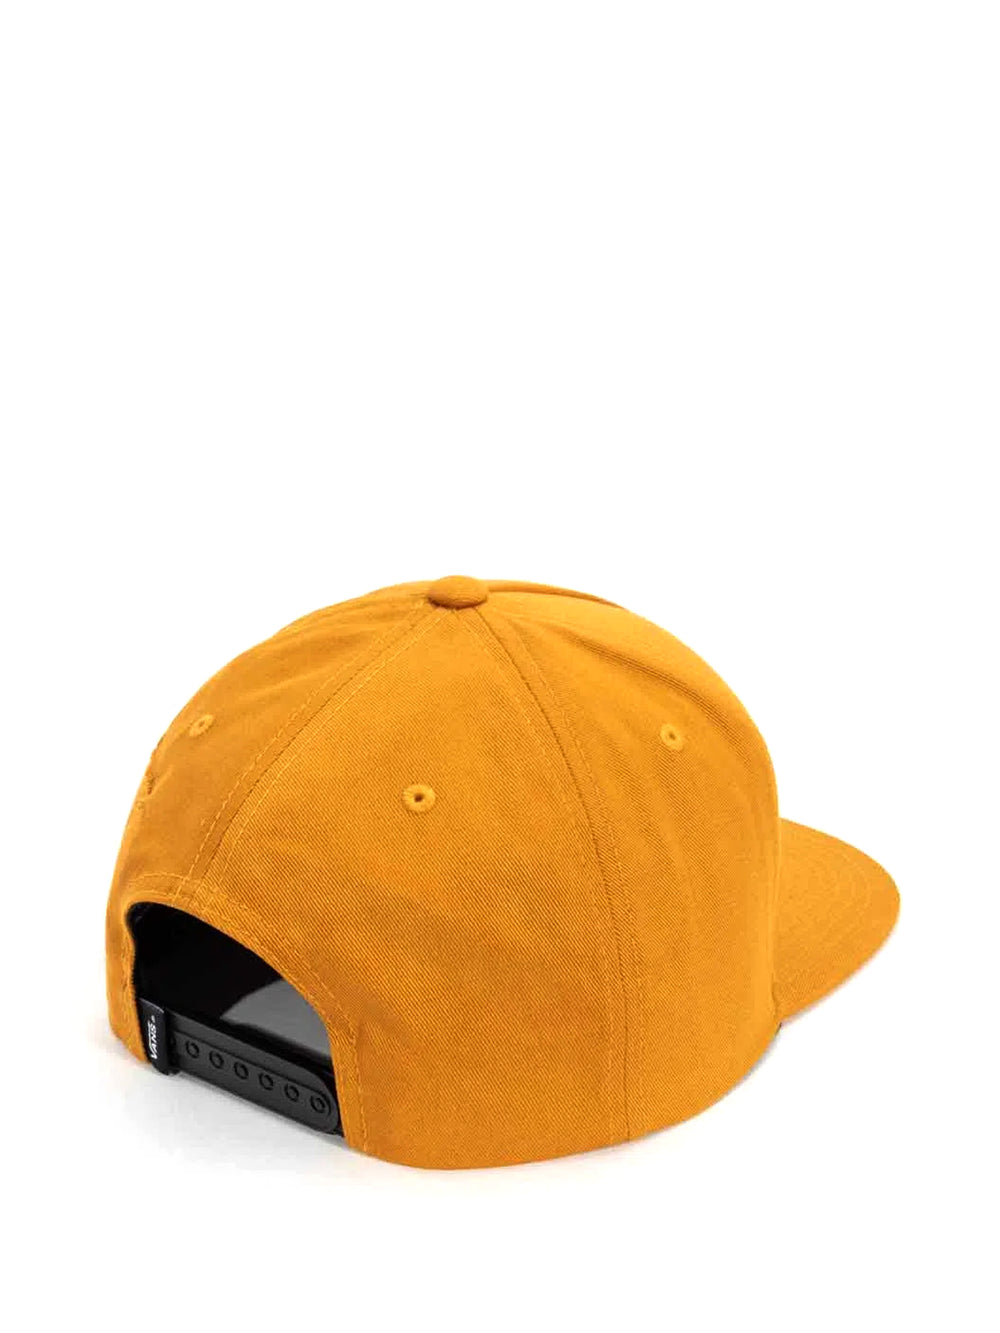 VANS FULL PATCH SNAPBACK HAT - CLEARANCE